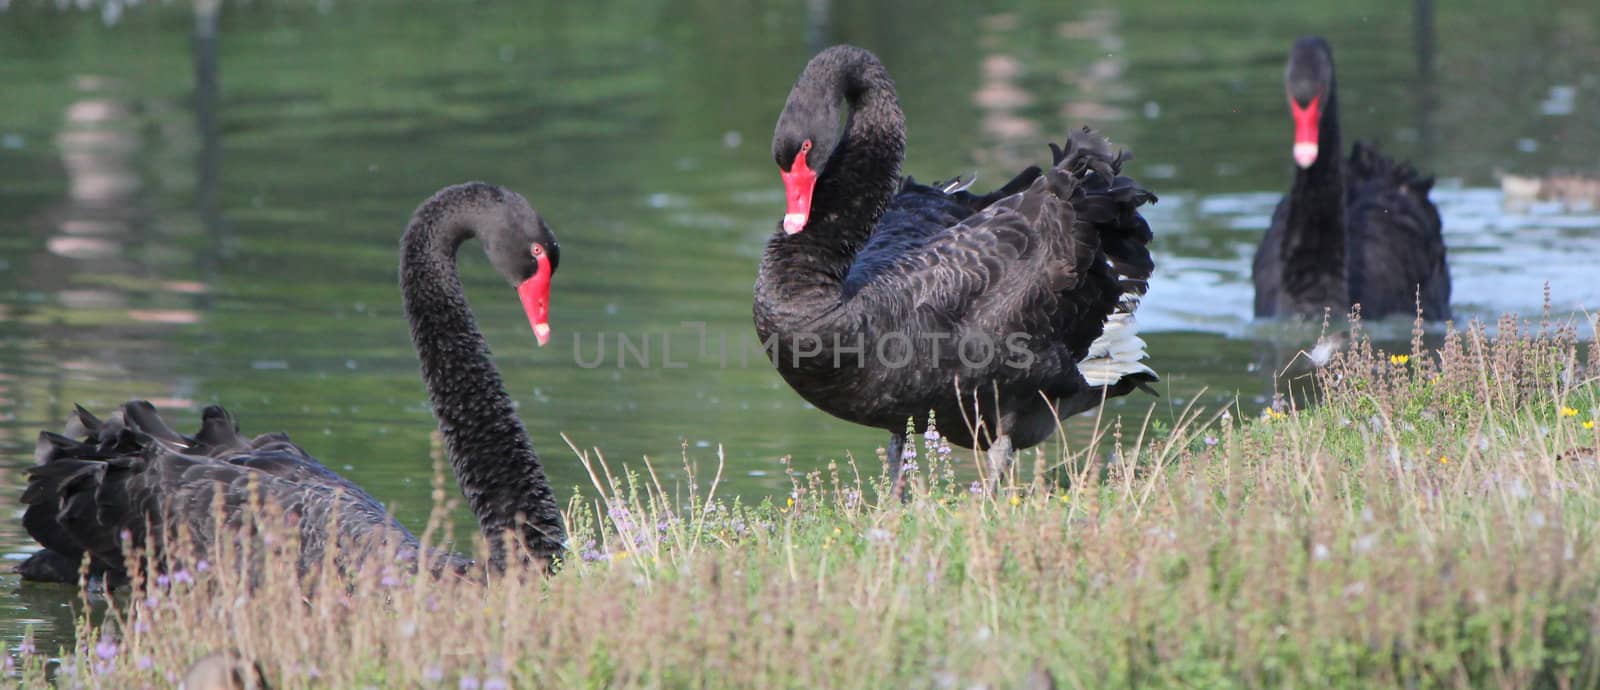 Three black swans with their red beak in the water lake